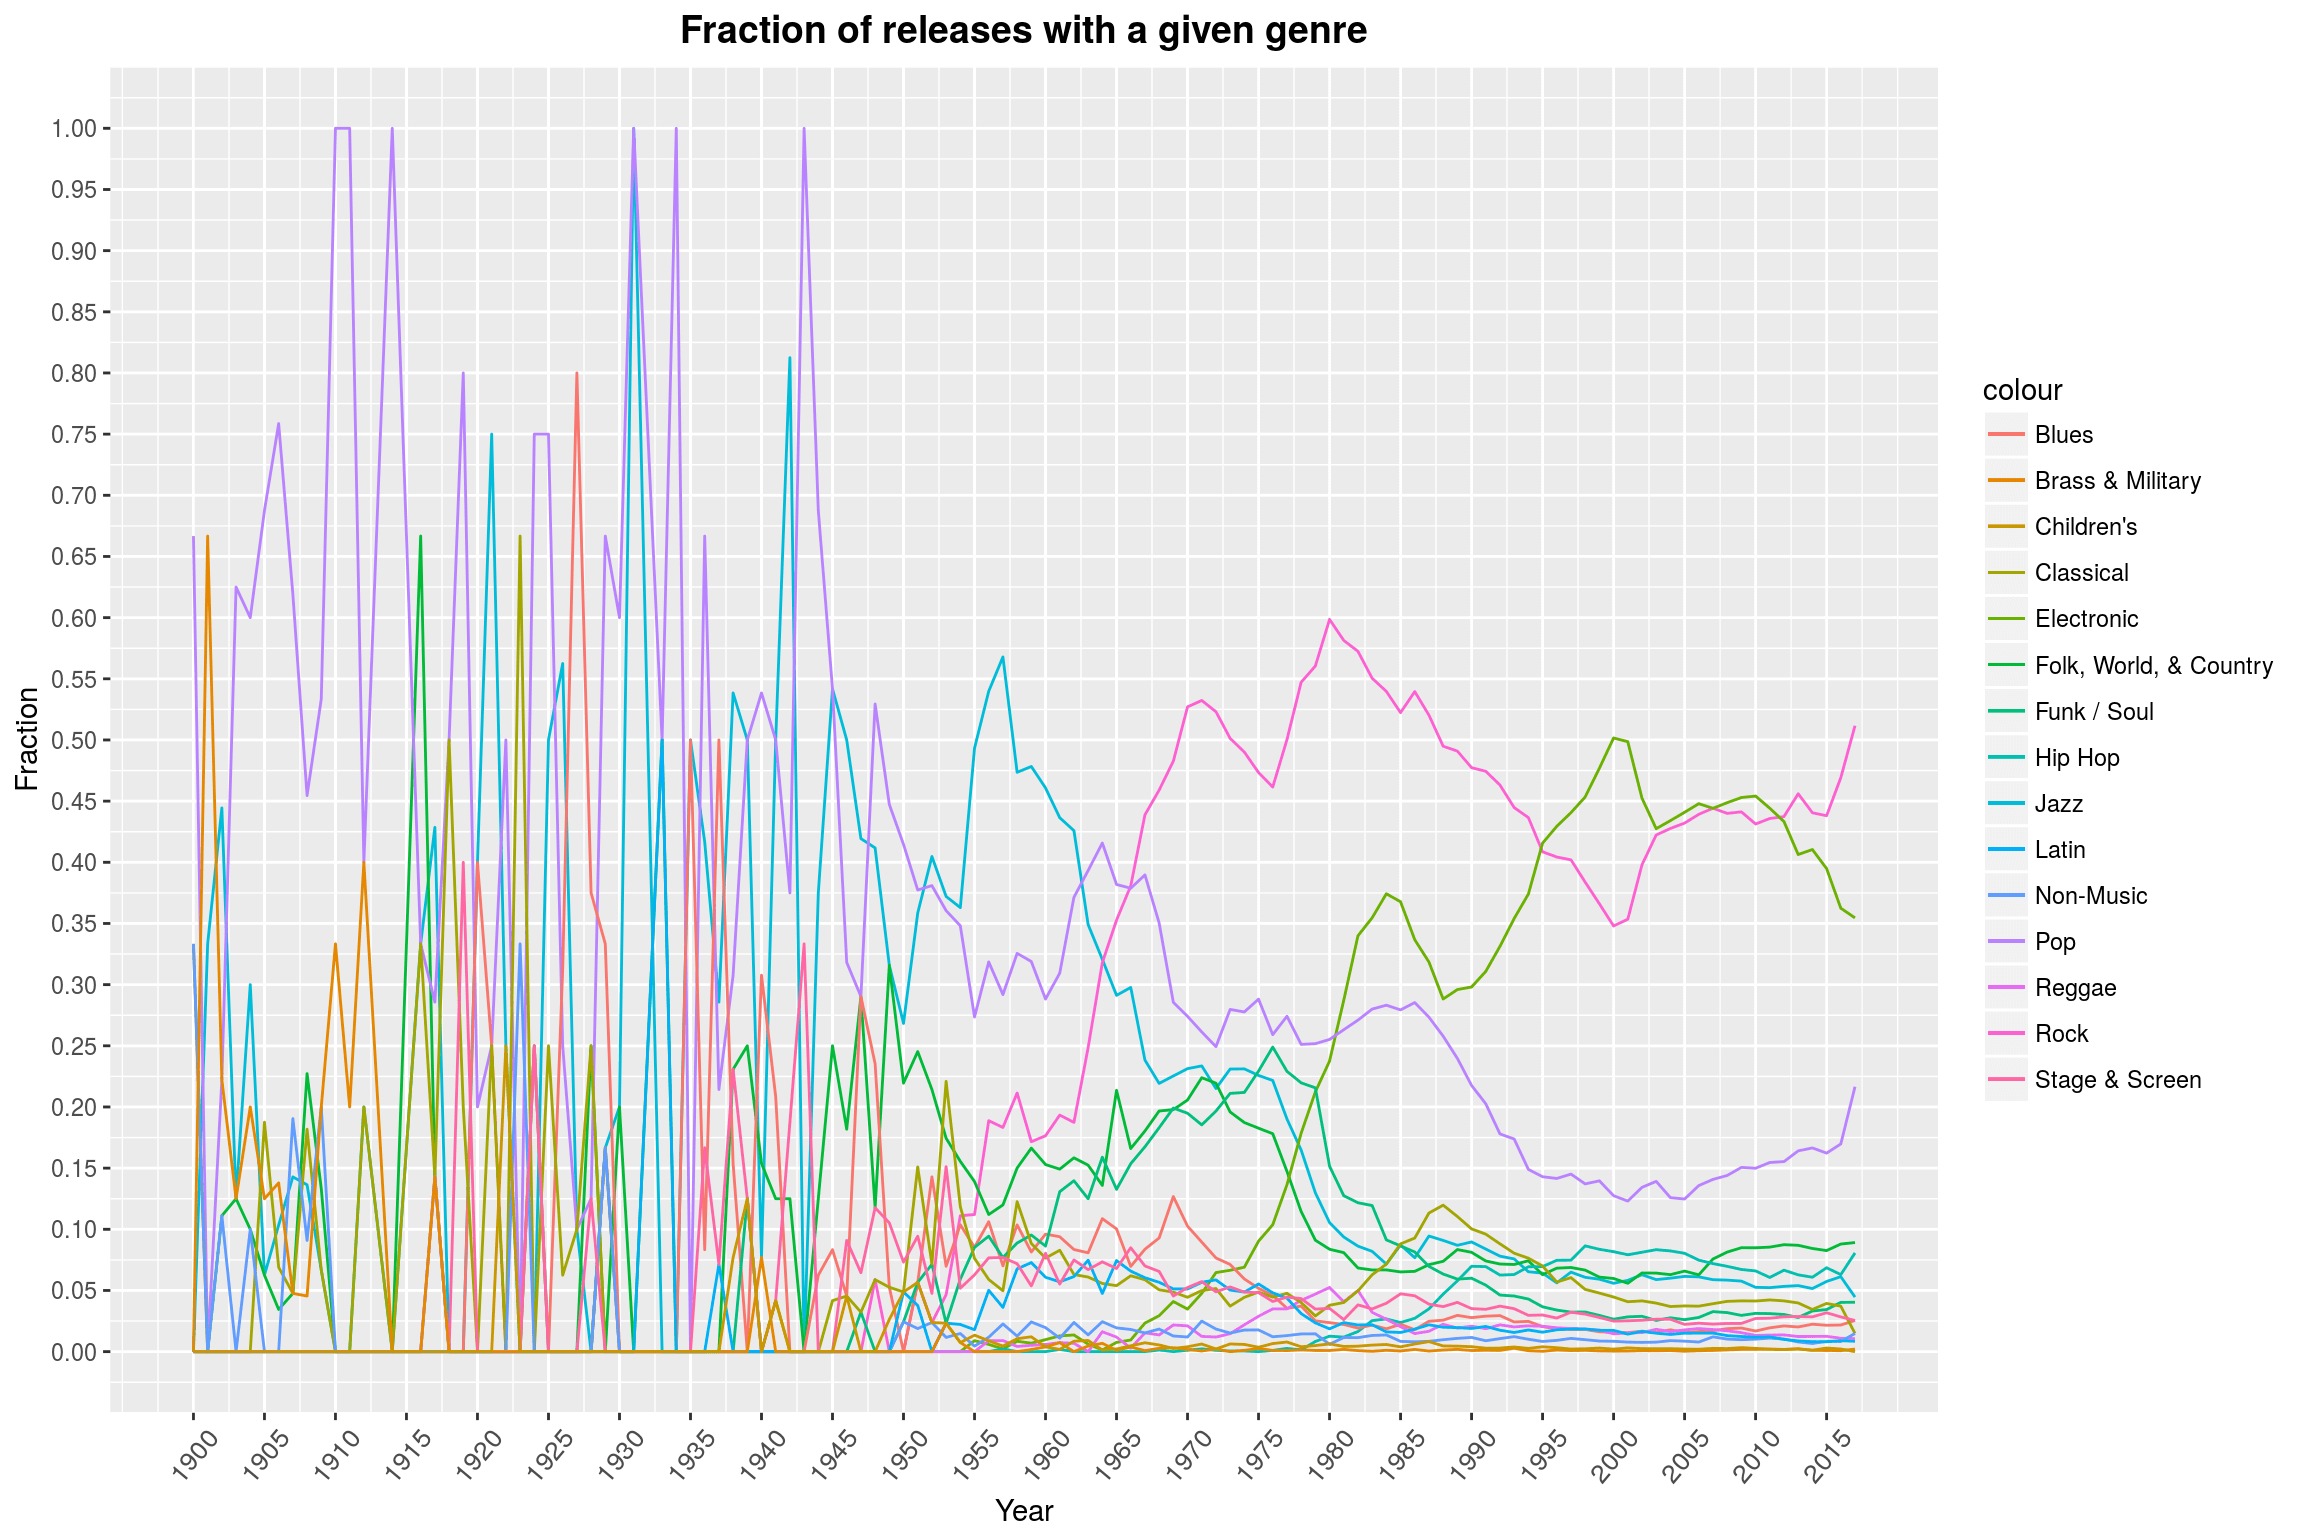 Fraction of release with a given genre per year